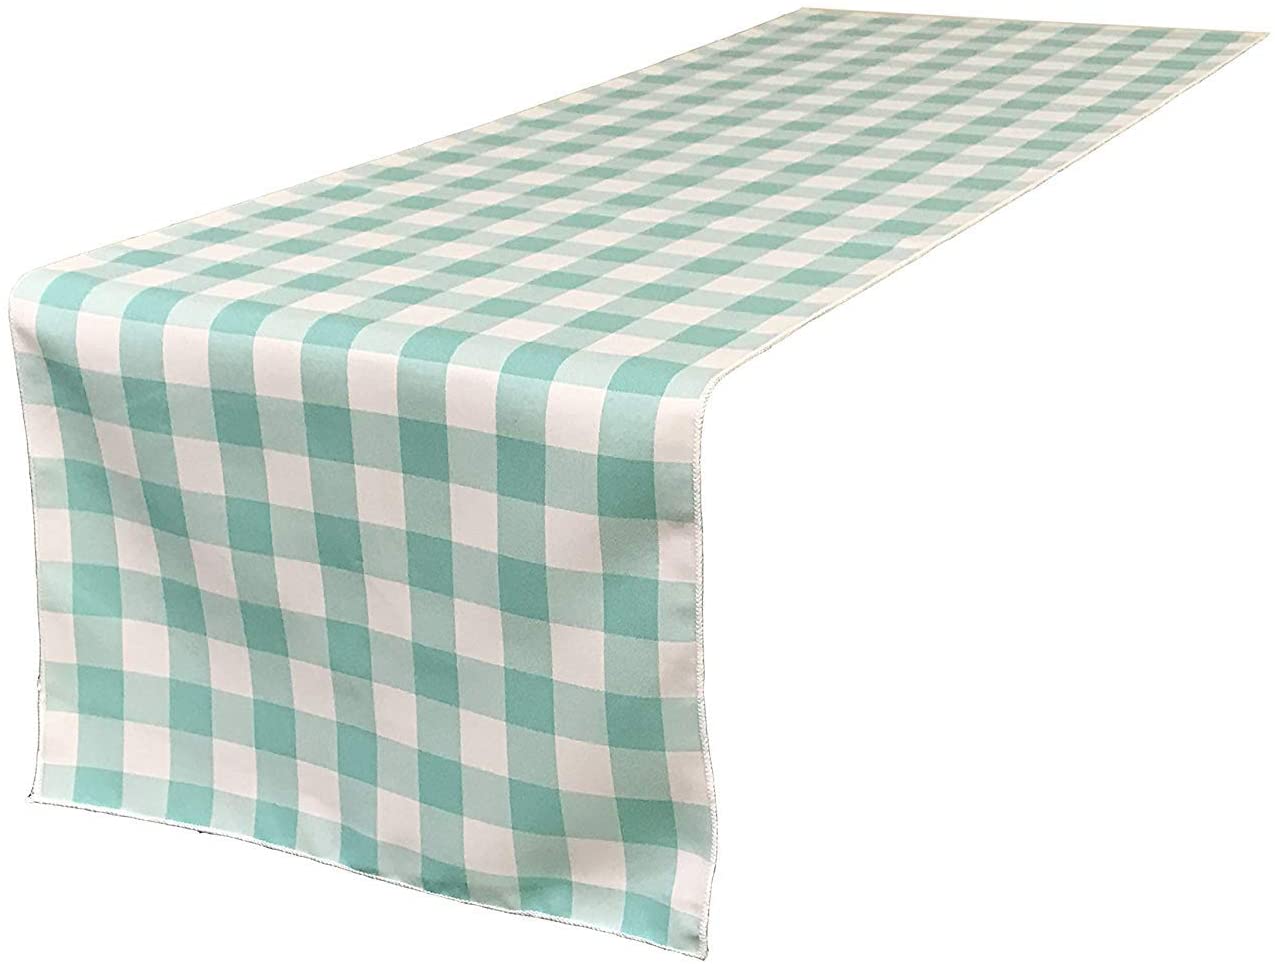 12" Wide by The Size of Your Choice, Polyester Poplin Gingham, Checkered, Plaid Table Runner (White & Aqua,